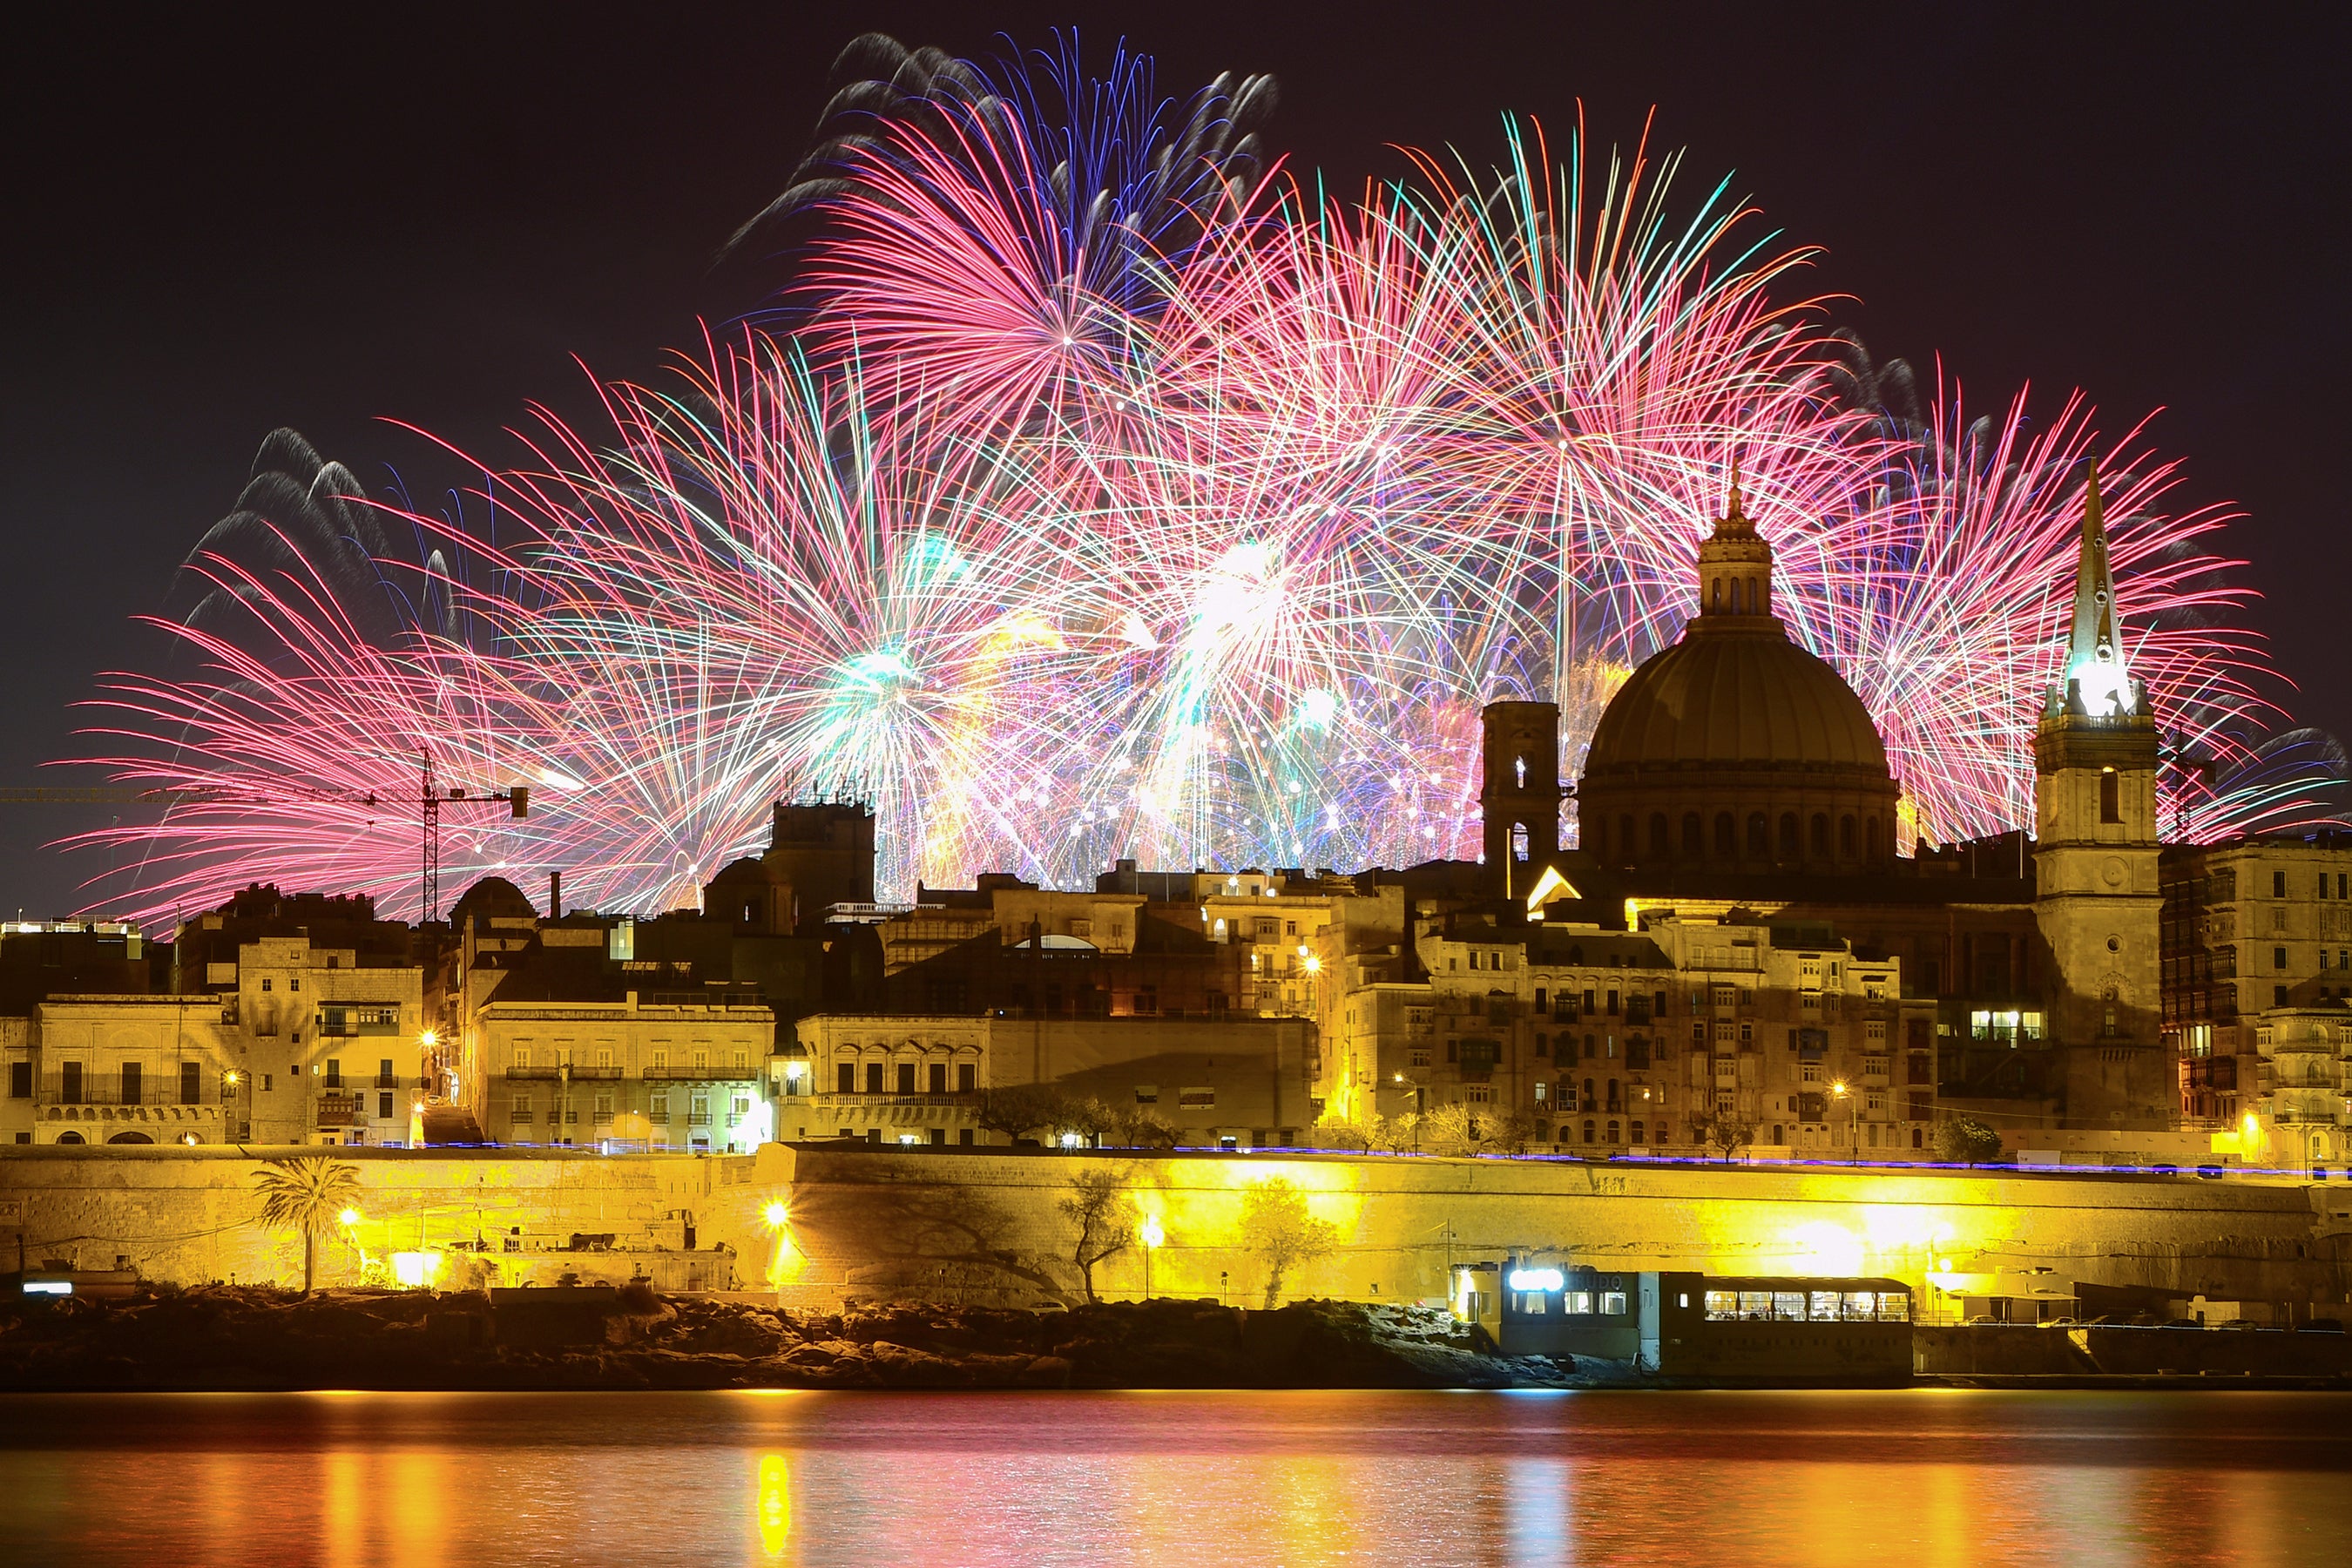 From thriving art and food scenes to fantastic festivals, Malta has something for everyone